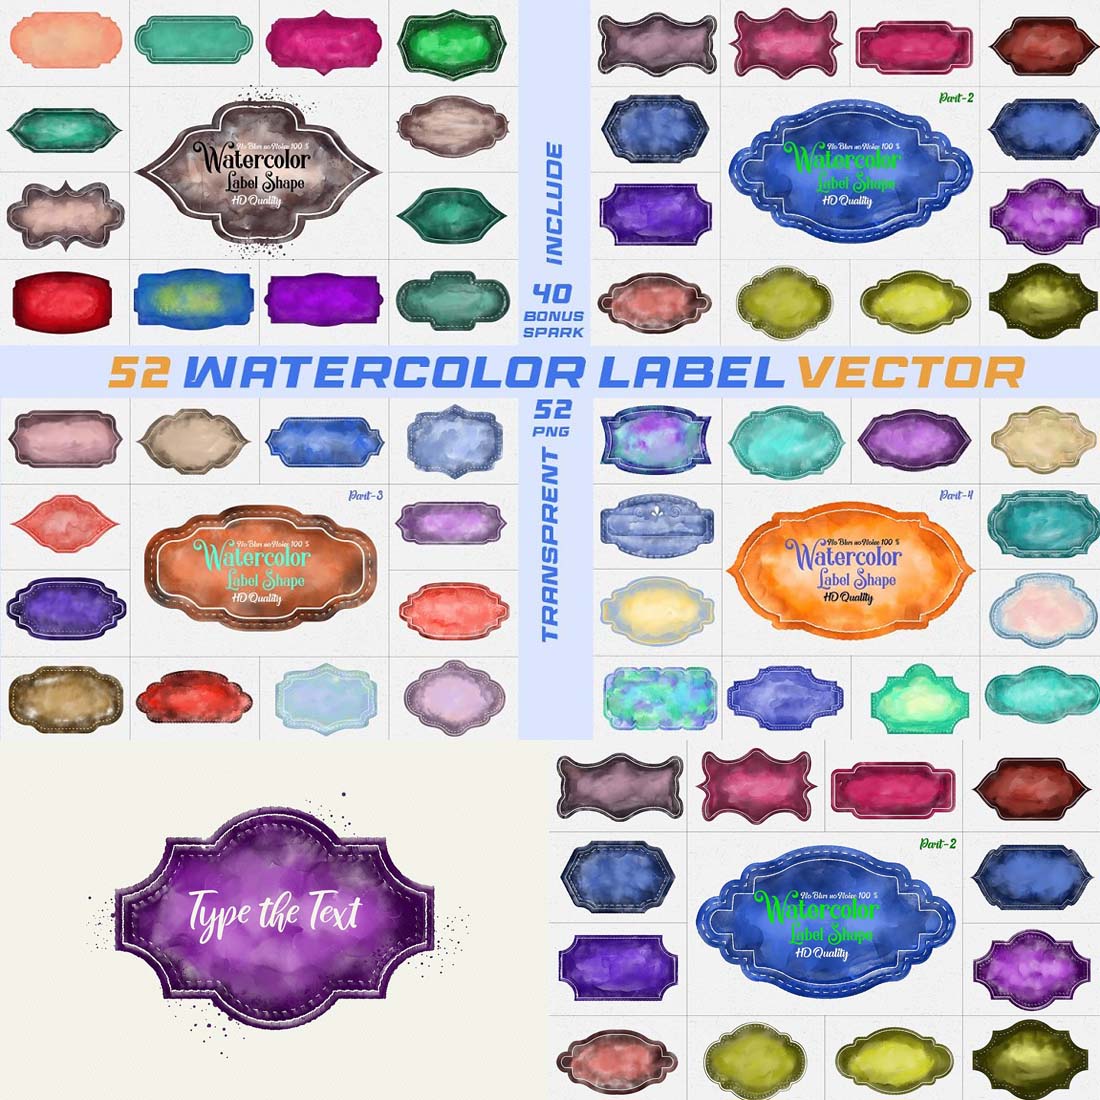 Watercolor Label Vector & PNG cover image.